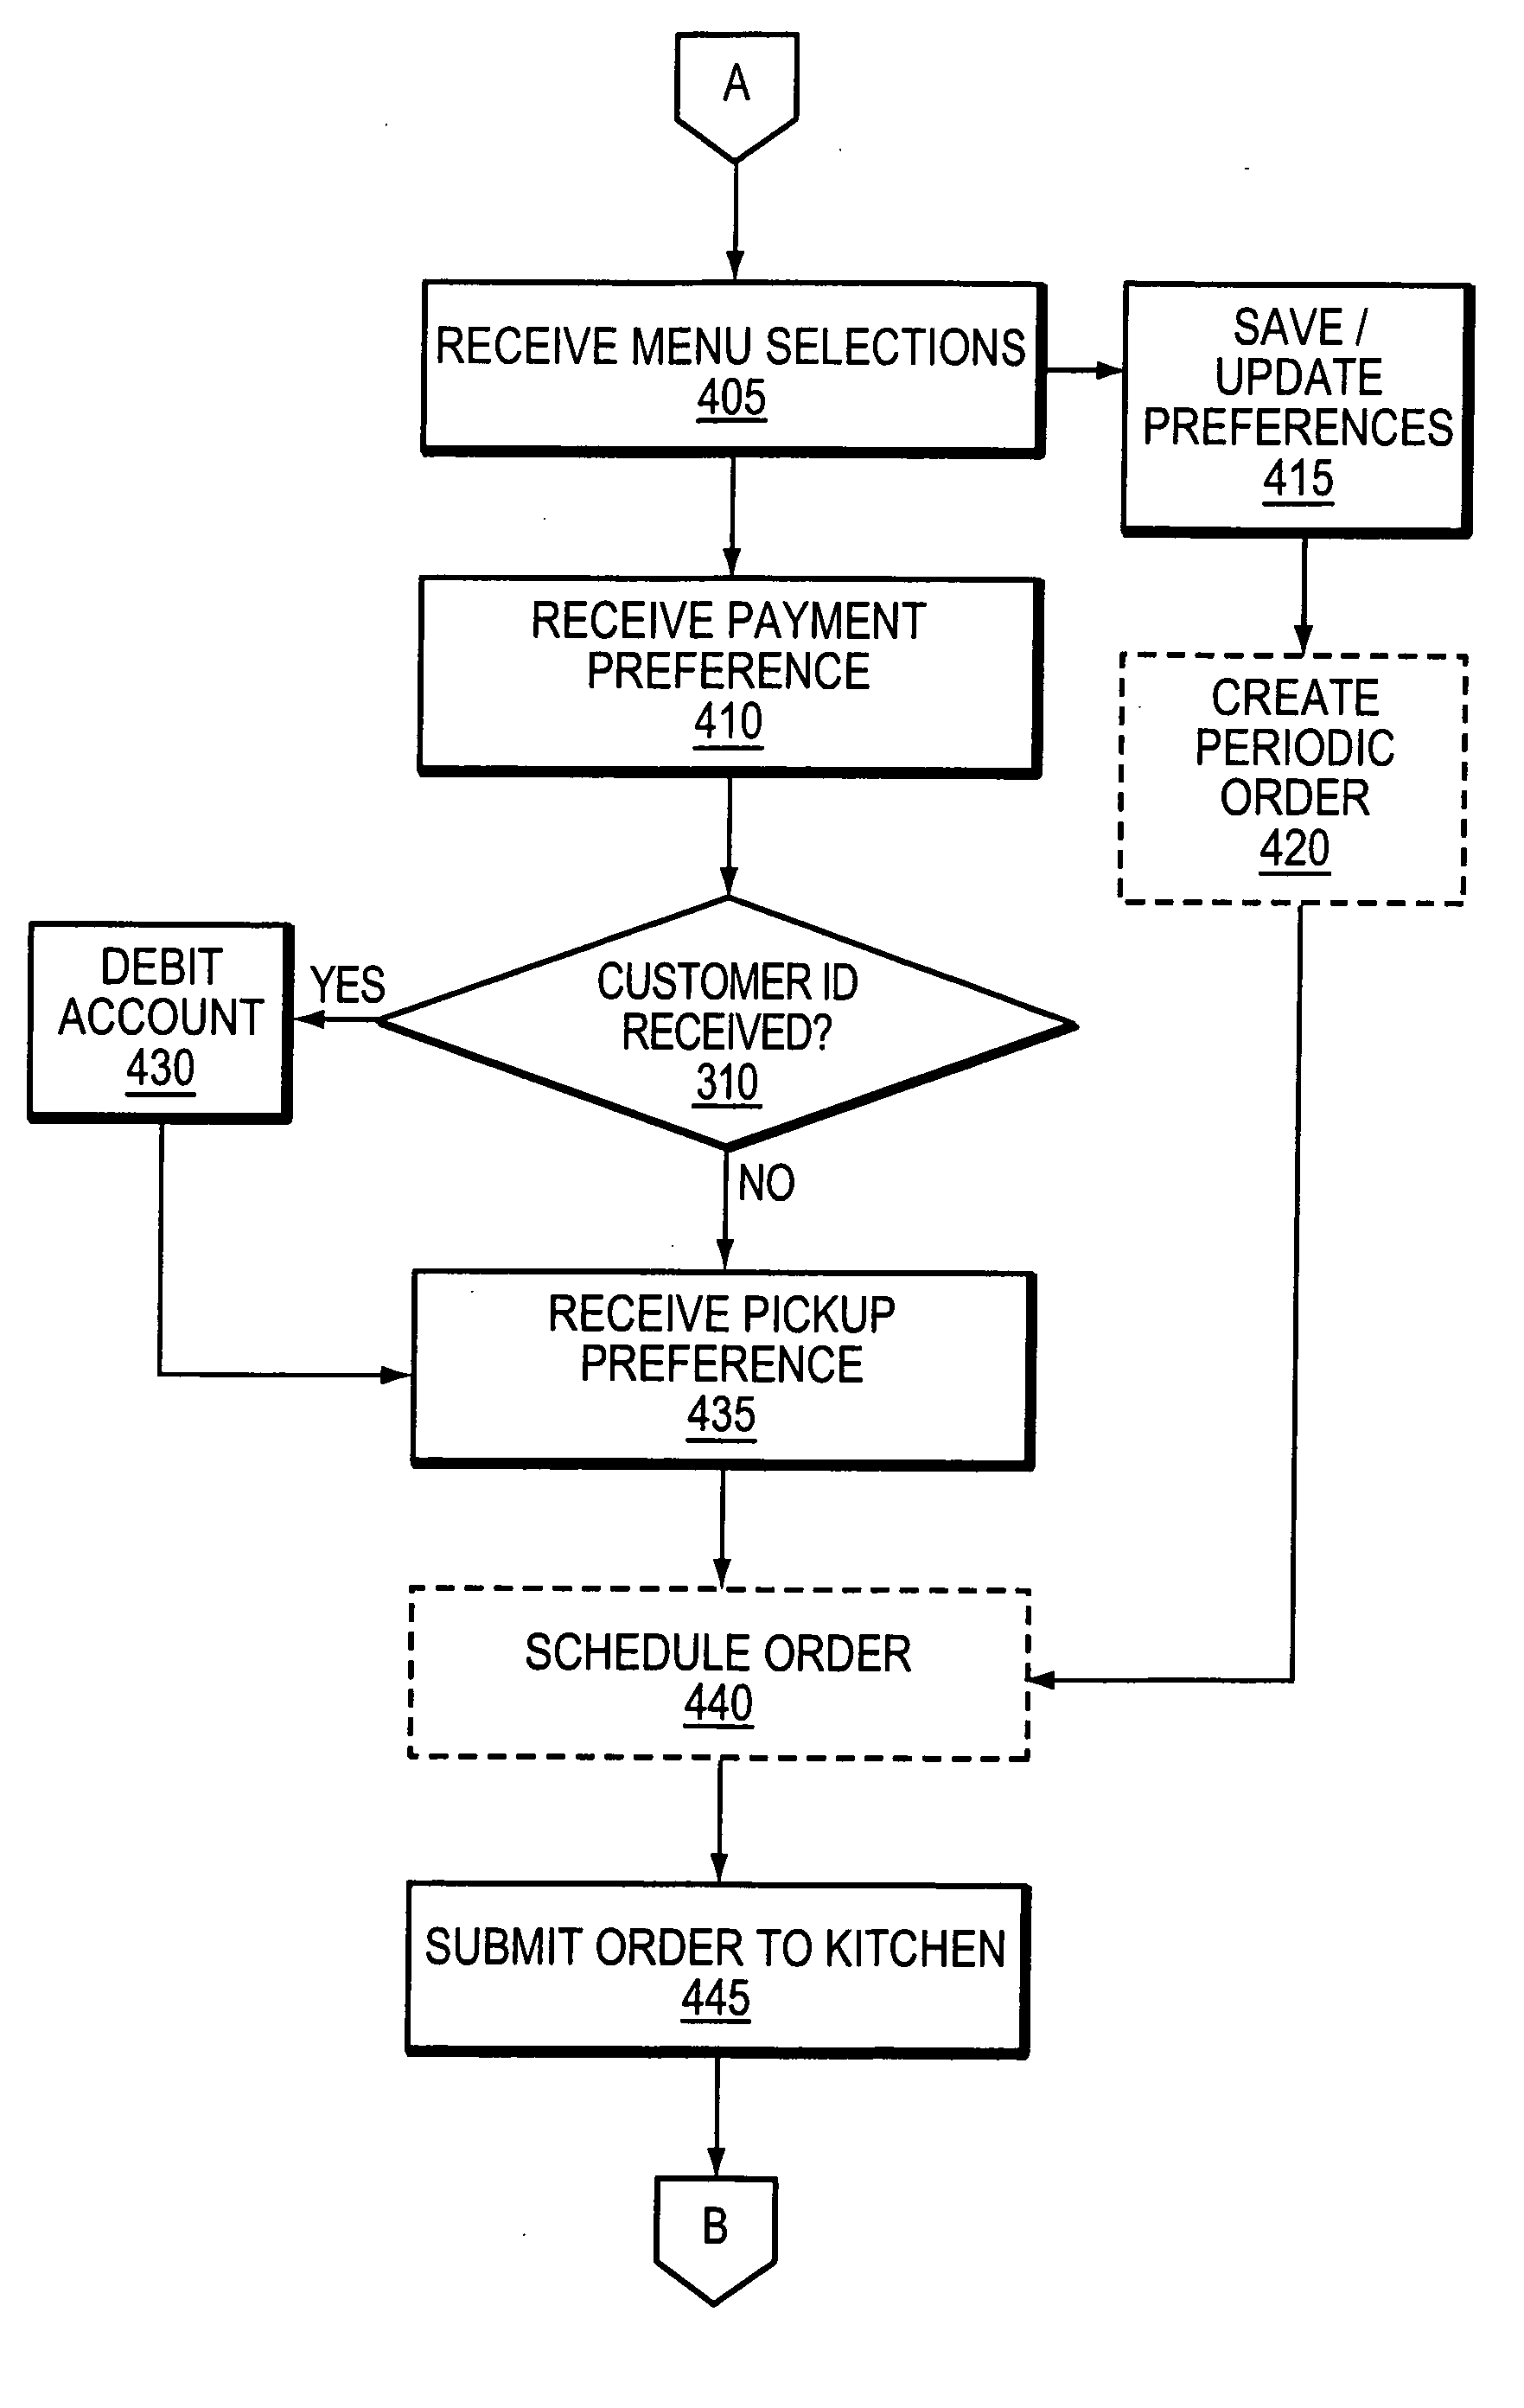 Systems and methods for providing remote ordering capabilities